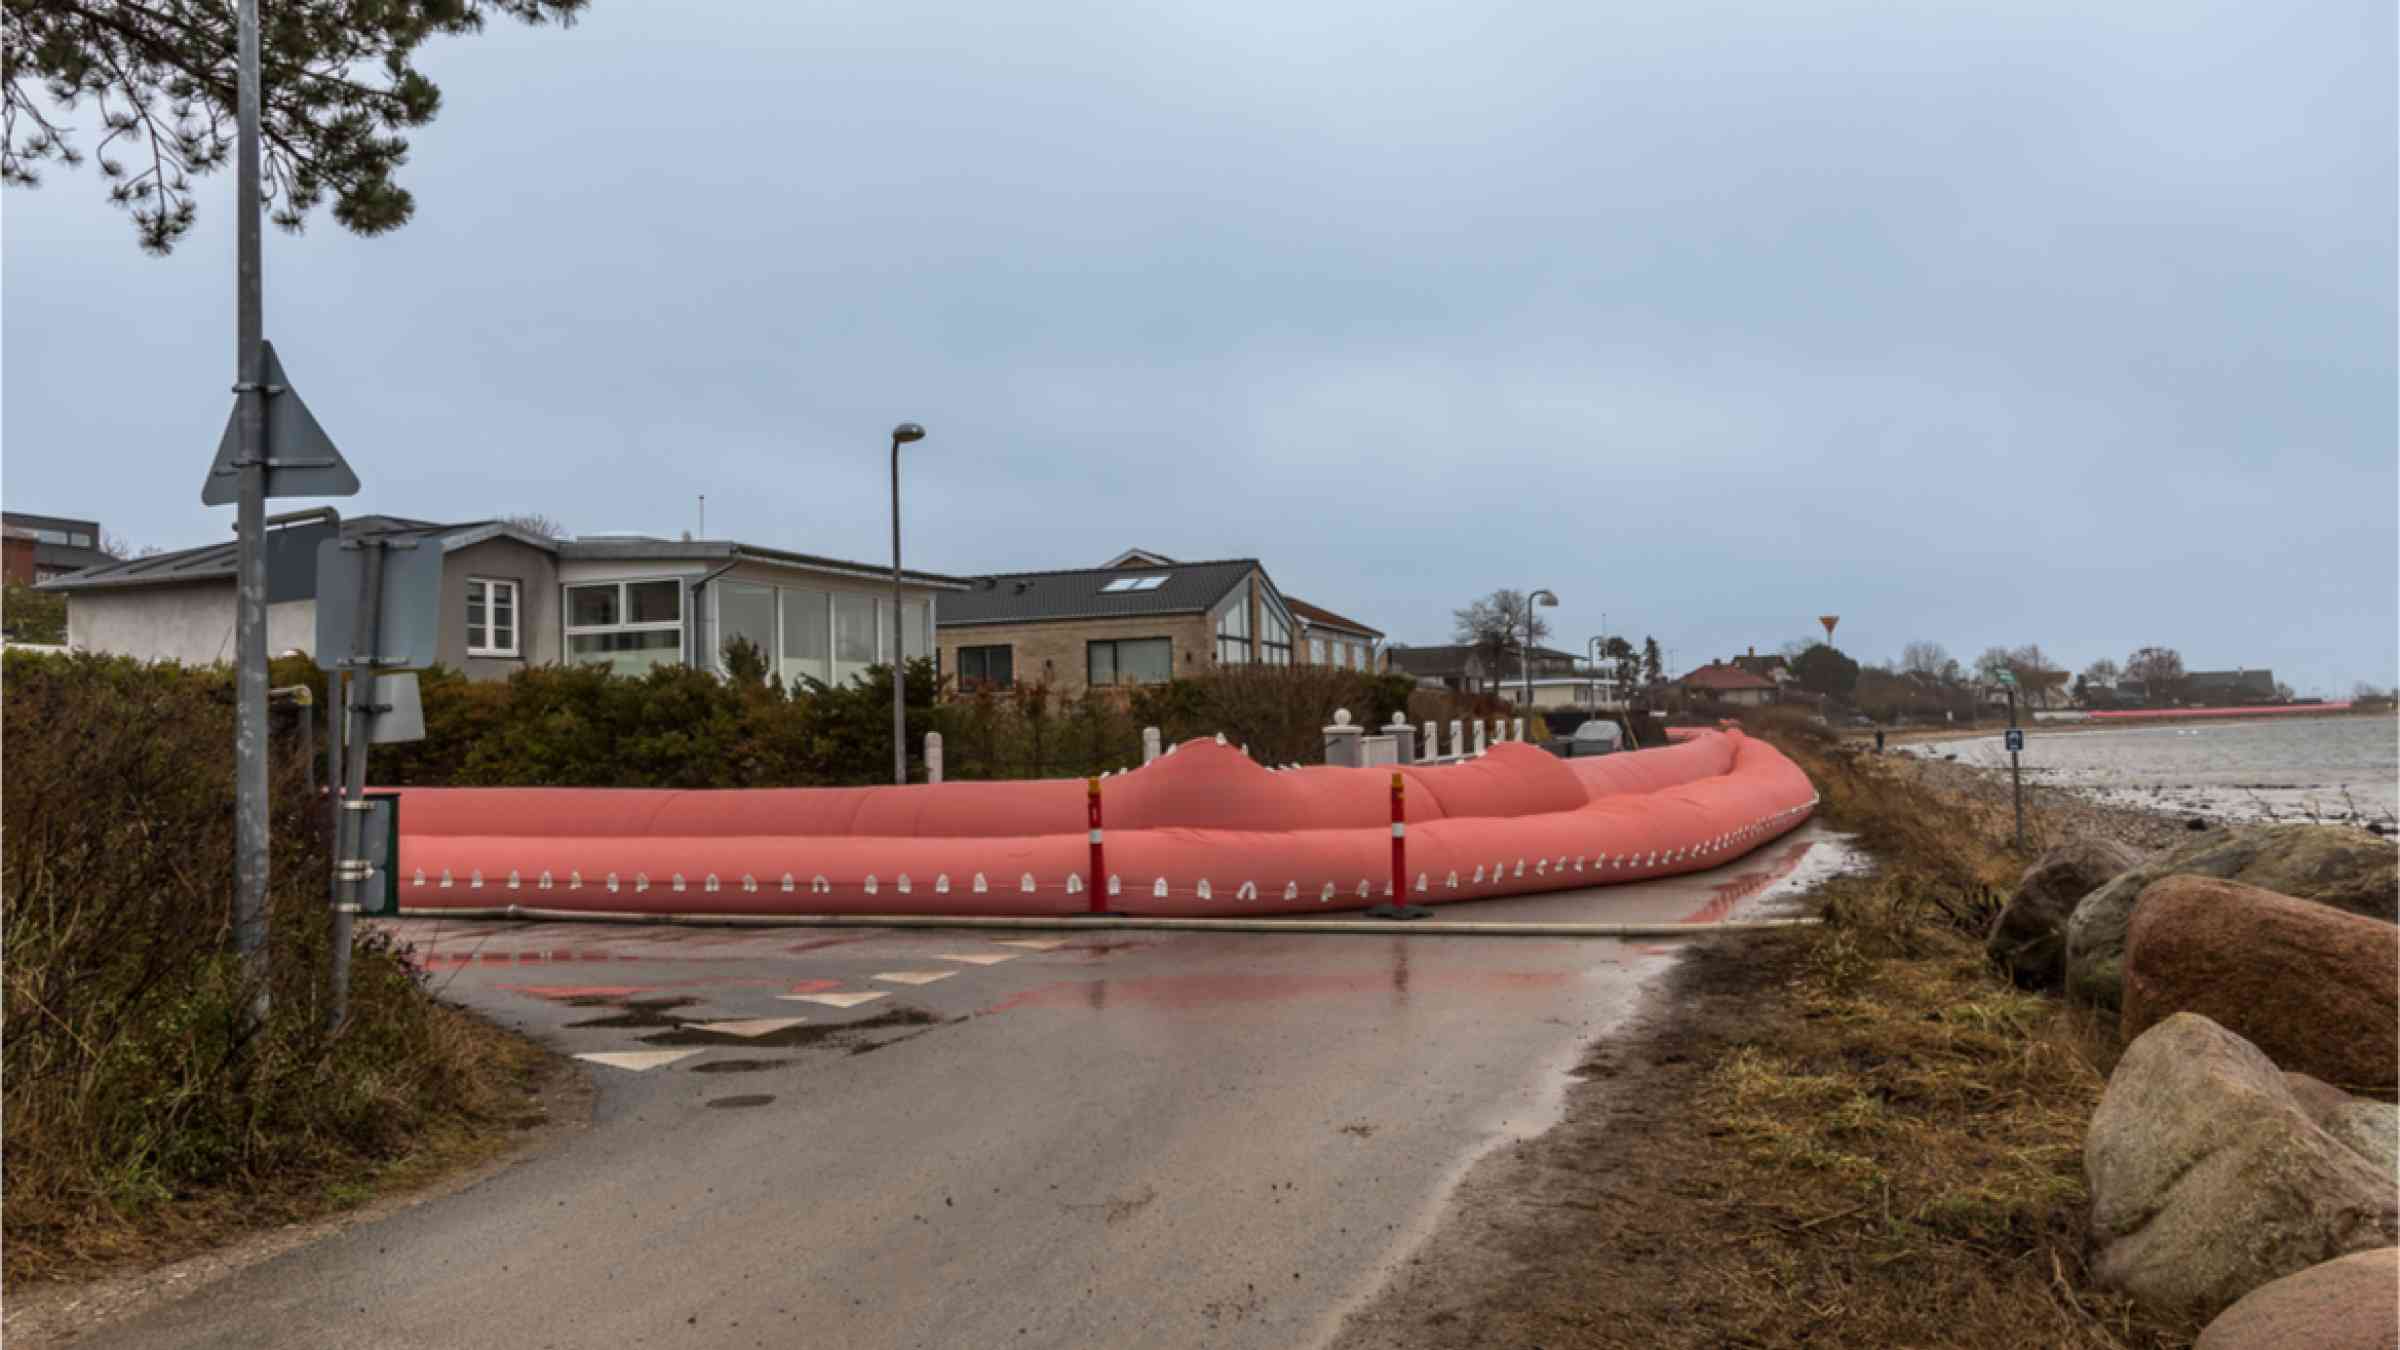 Pink water tube on the shore in Frederikssund in Denmark to prevent flooding from Storm Malik.